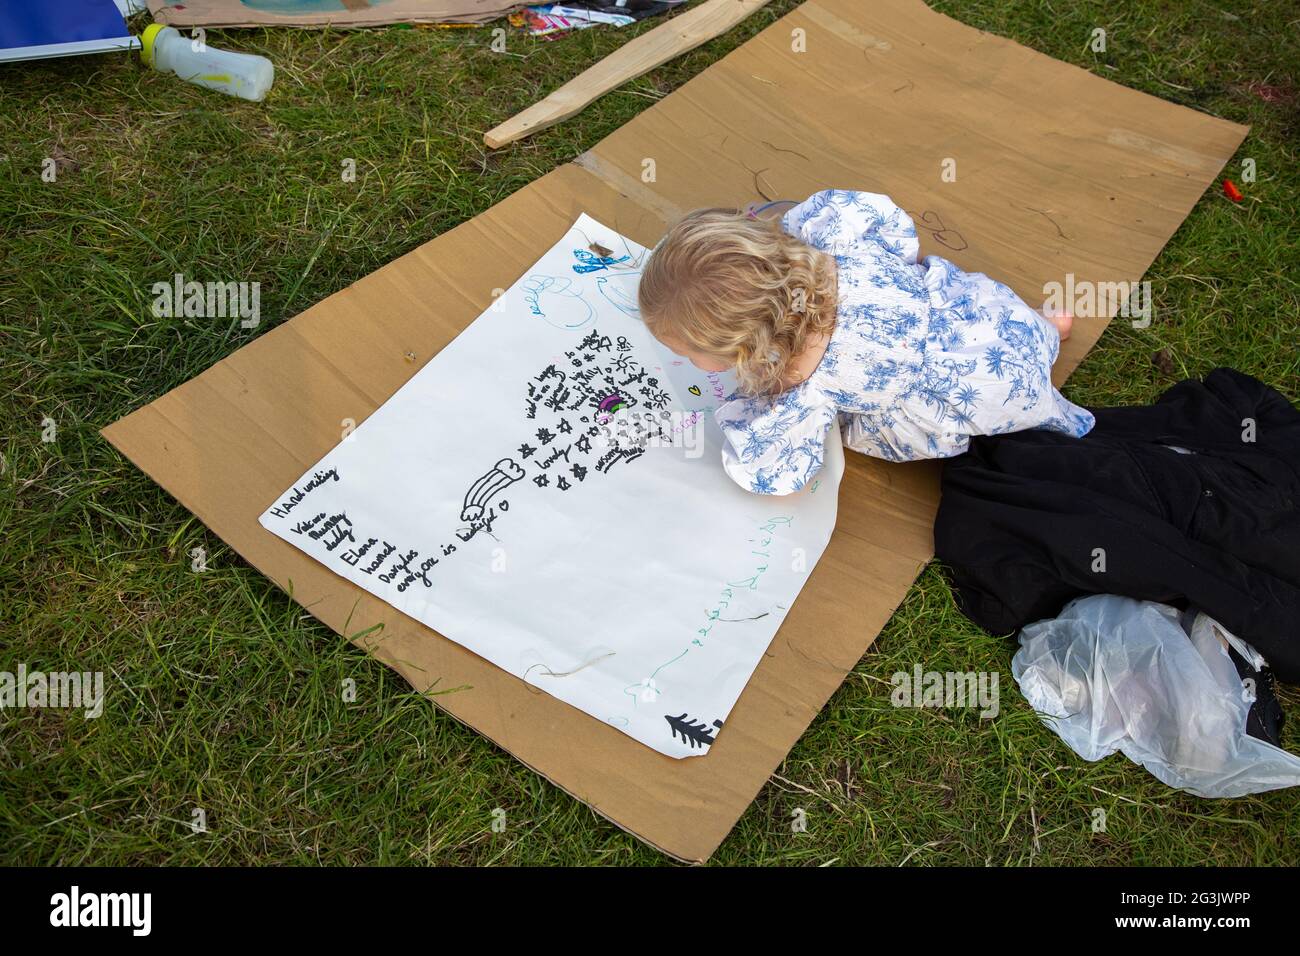 A little girl drawing a protest sign at the freedom protester camp on Shepherd's Bush Green, London, UK. June 2021 Stock Photo